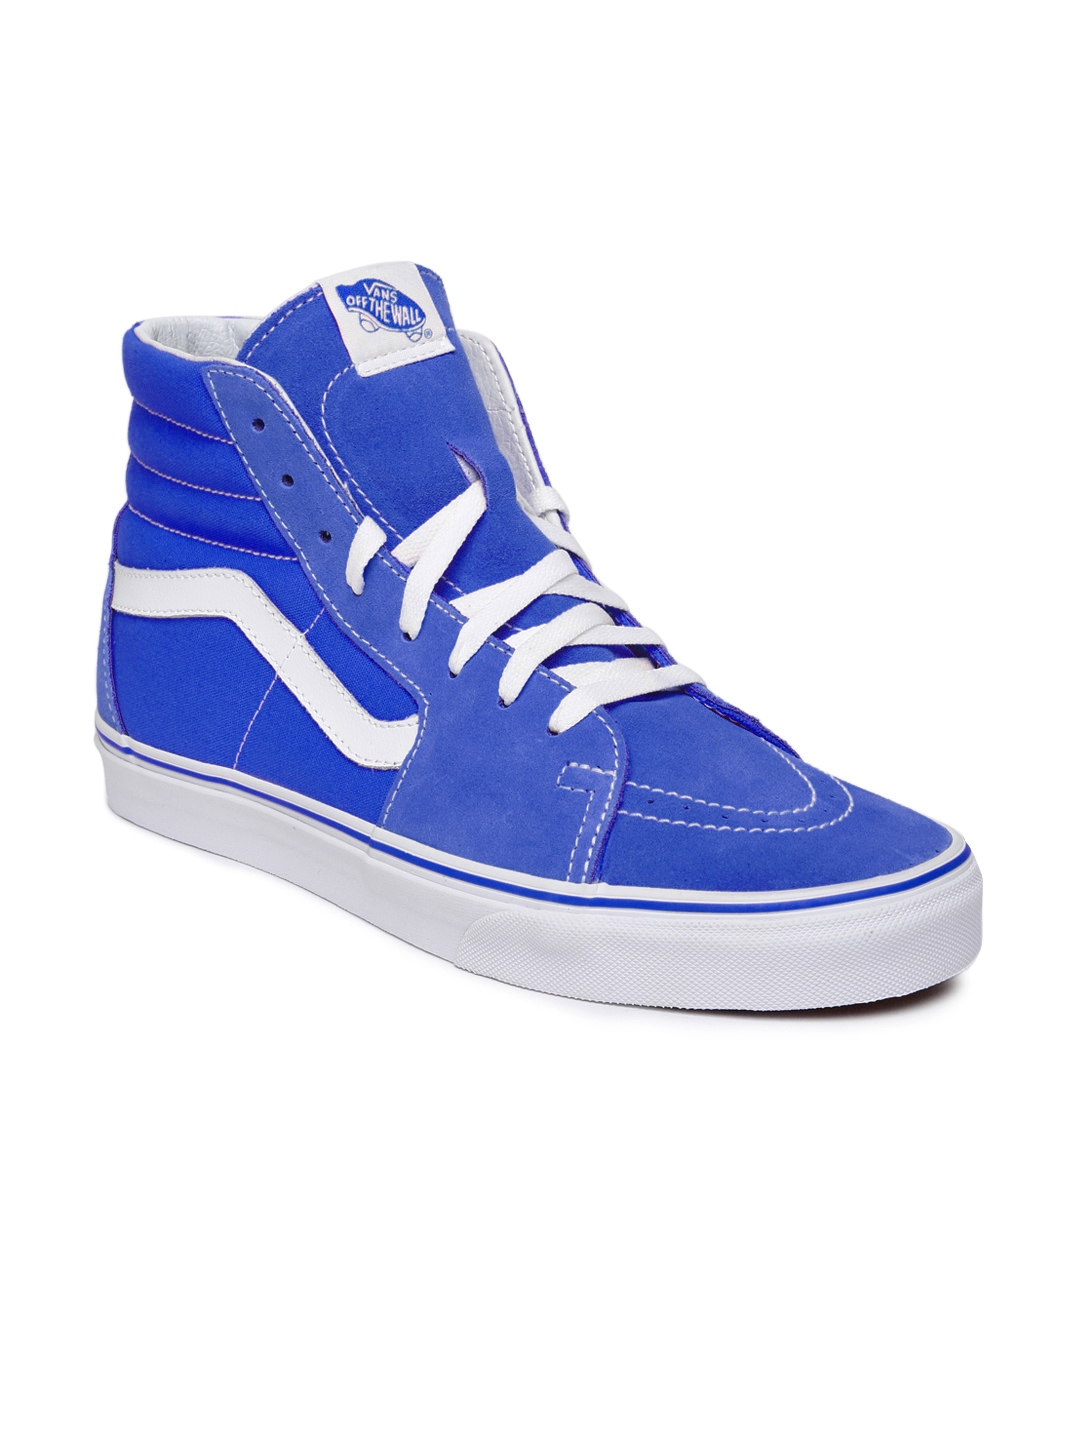 Buy Vans Unisex Blue Solid High Top Suede Skate Shoes - Casual Shoes ...